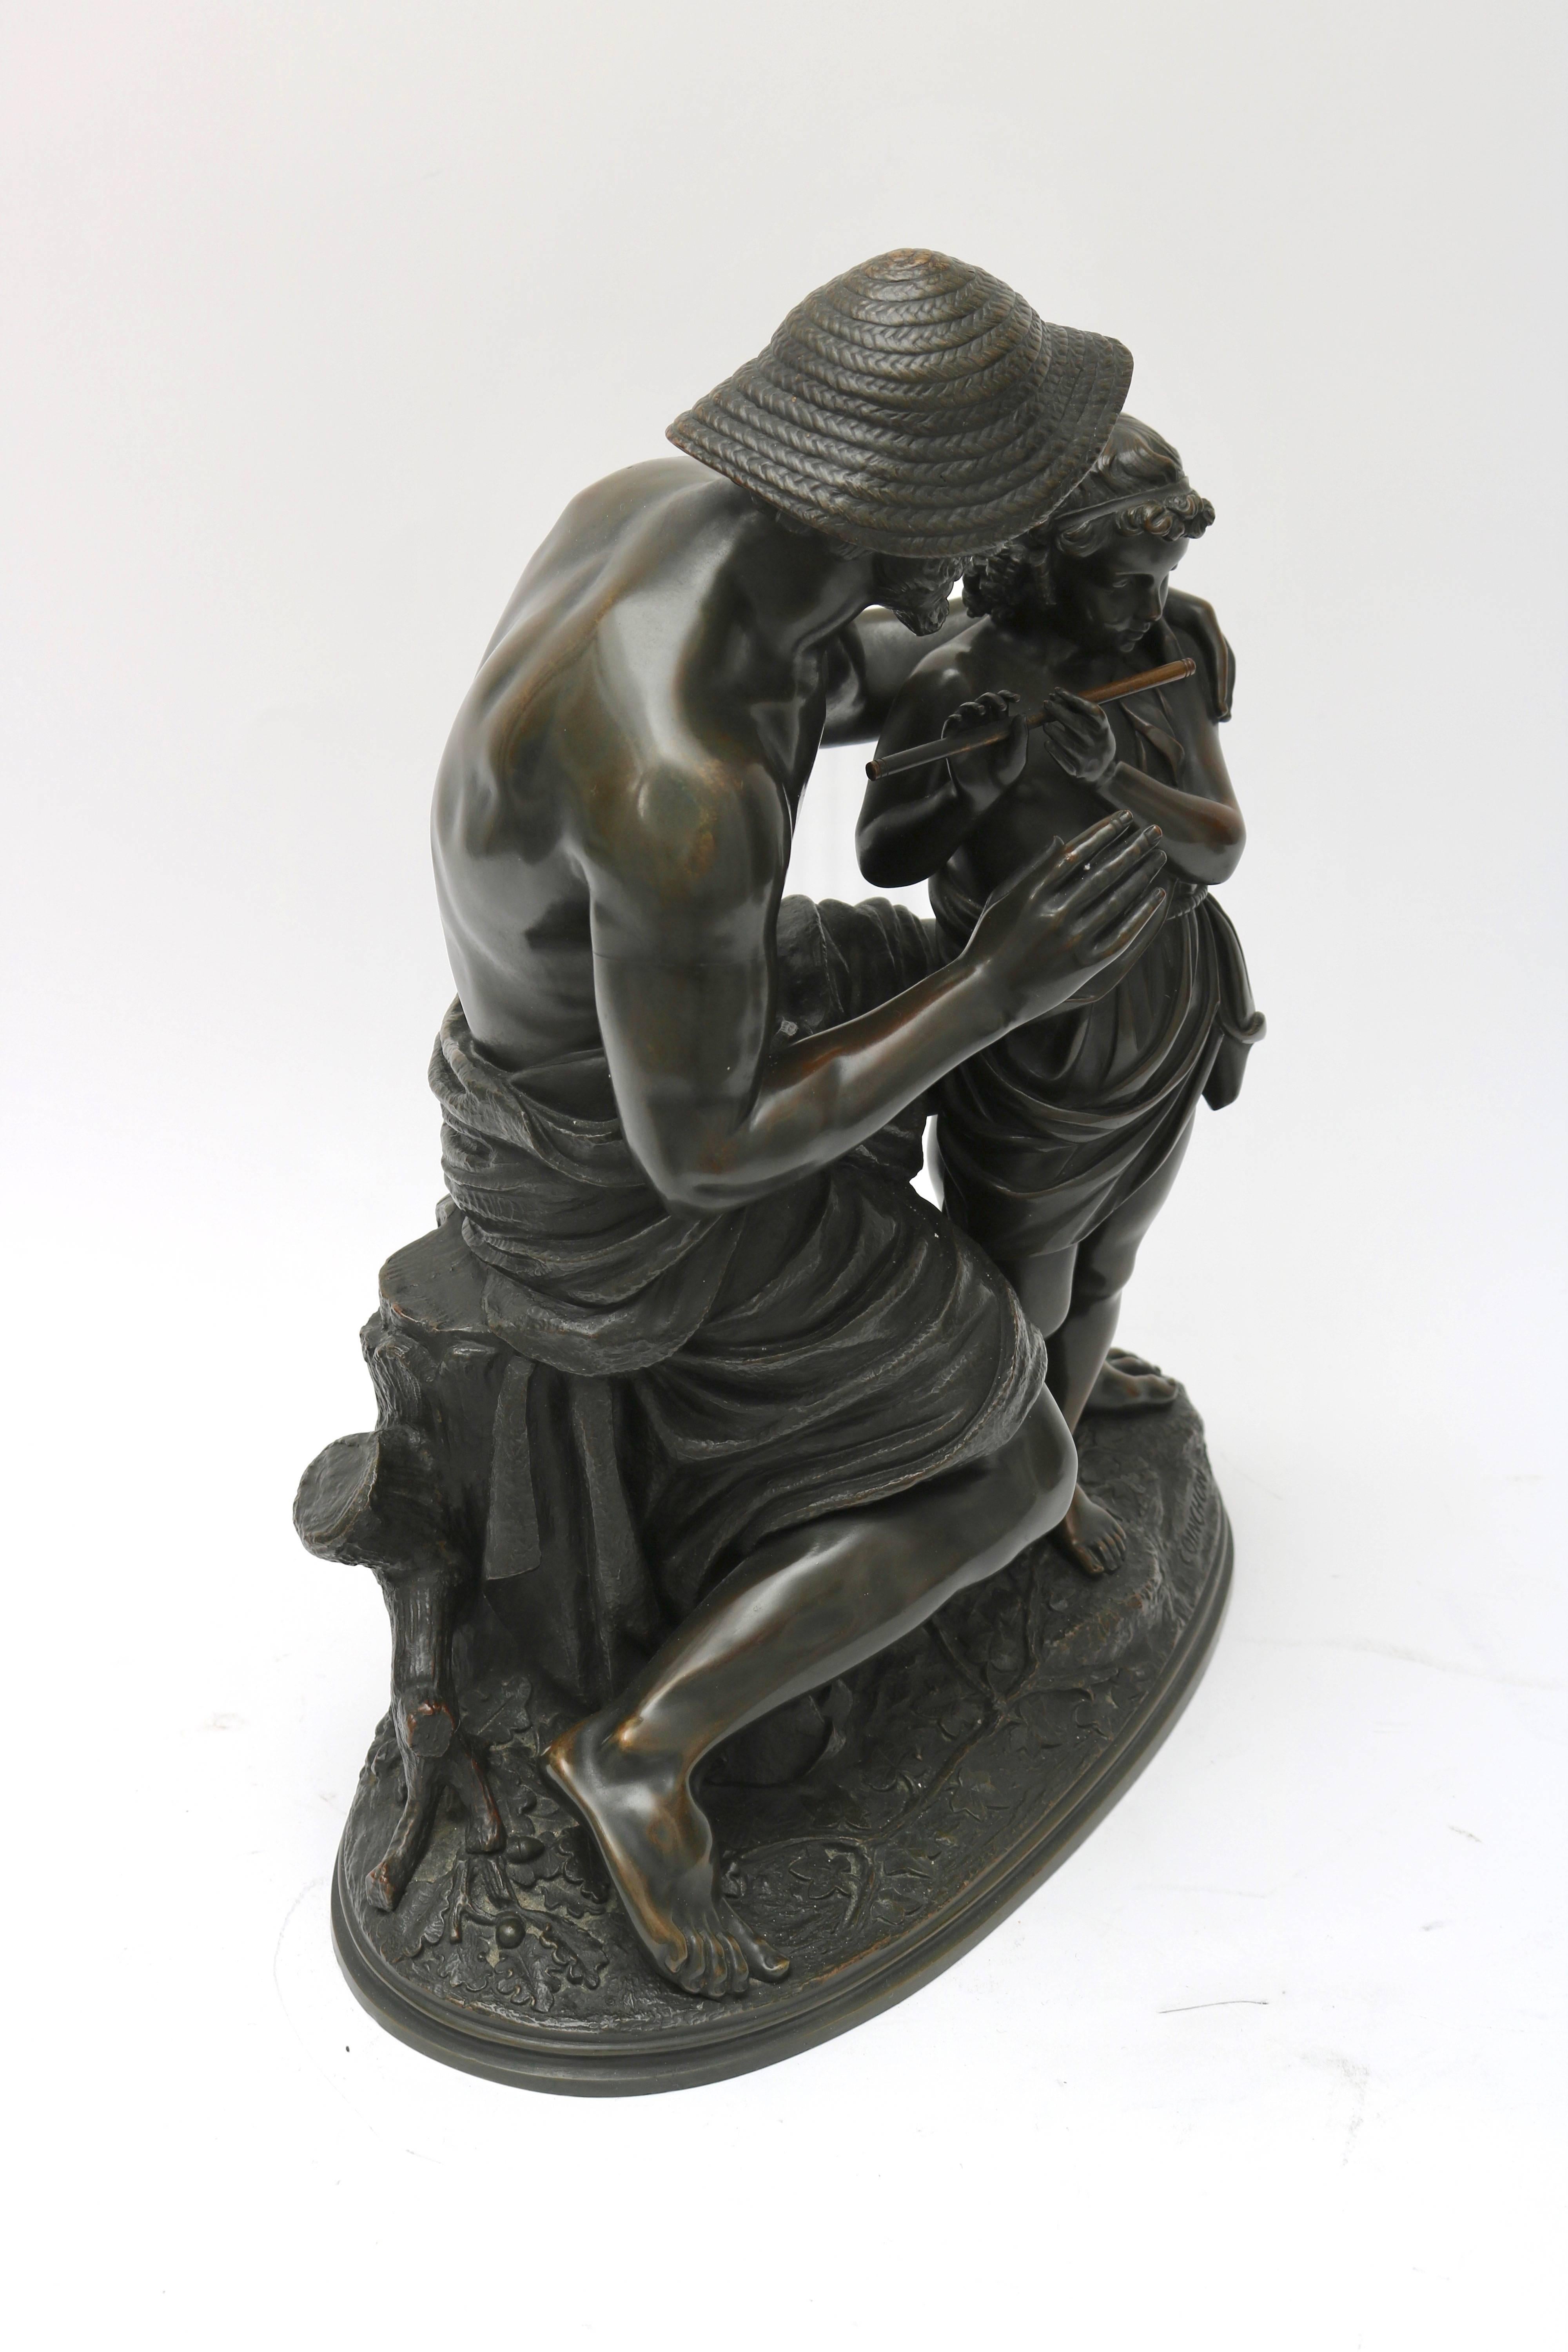 This charming bronze dates from the mid-late 19th century and was created by the French sculptor Jaques Antoine Coinchon. The piece depicts a father teaching his son how to play the flute.
FYI:
Jaques - Antoine - Théodore Coinchon (1814 to 1881,